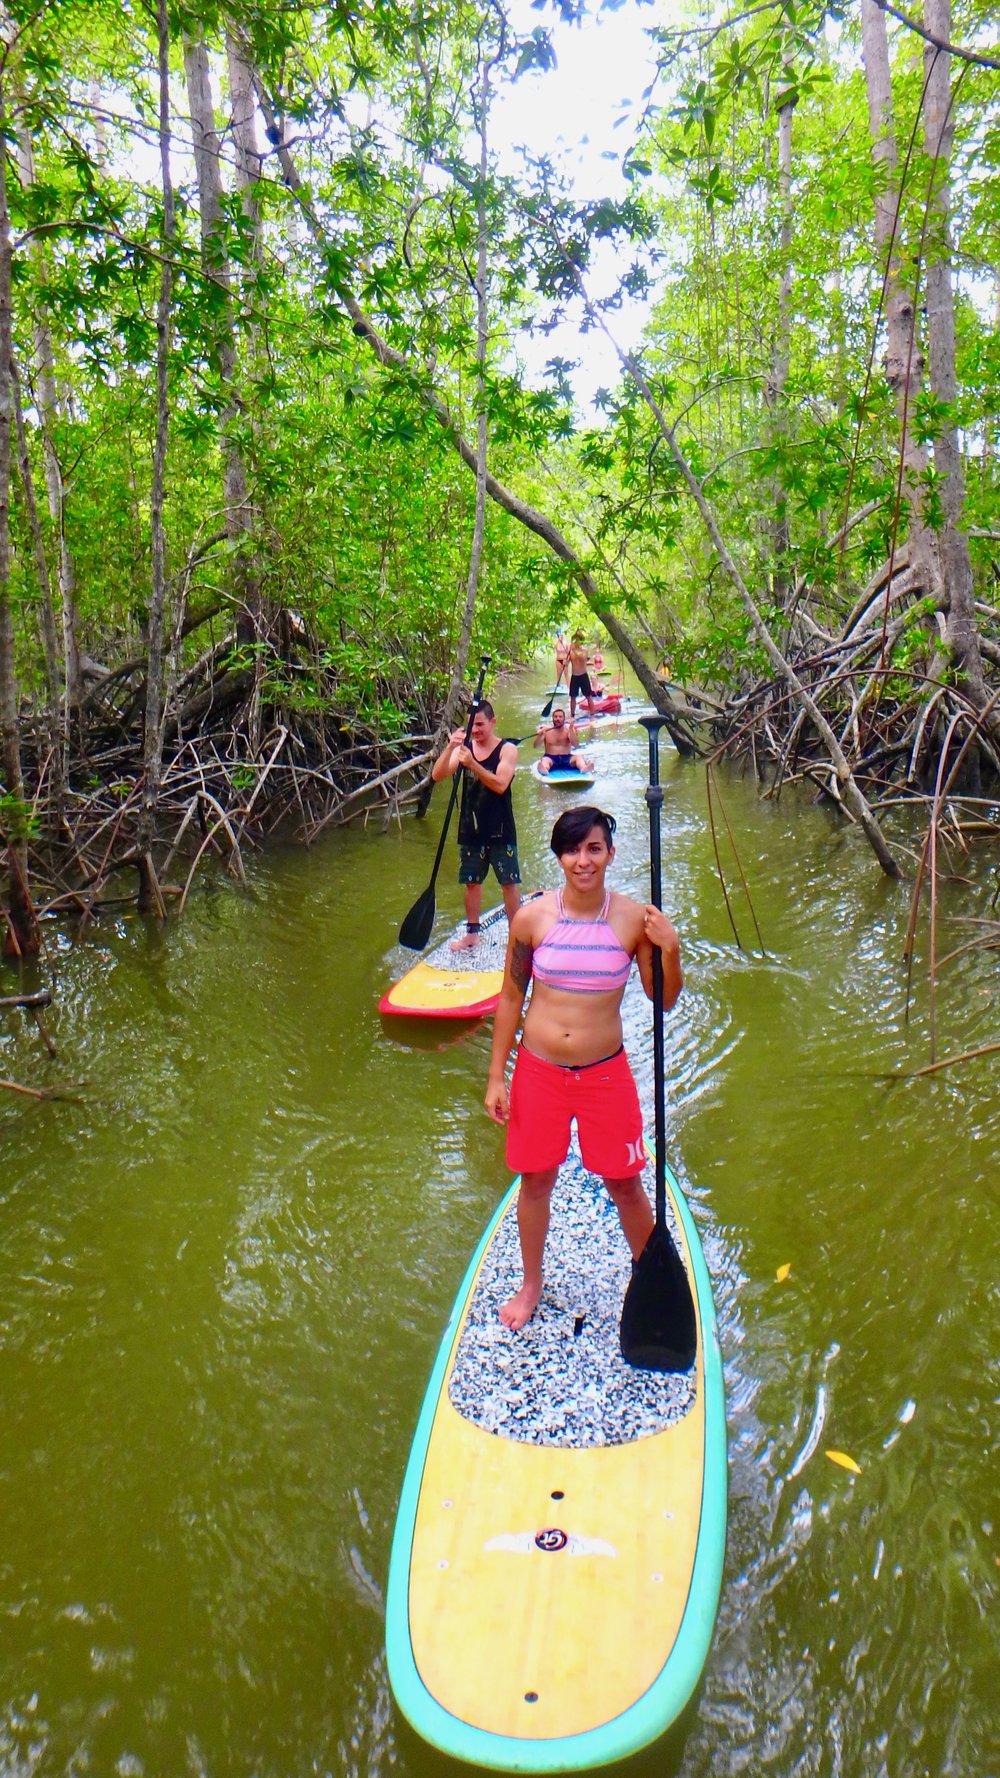 Stand Up Paddle Board Tours in the mangroves Costa Rica